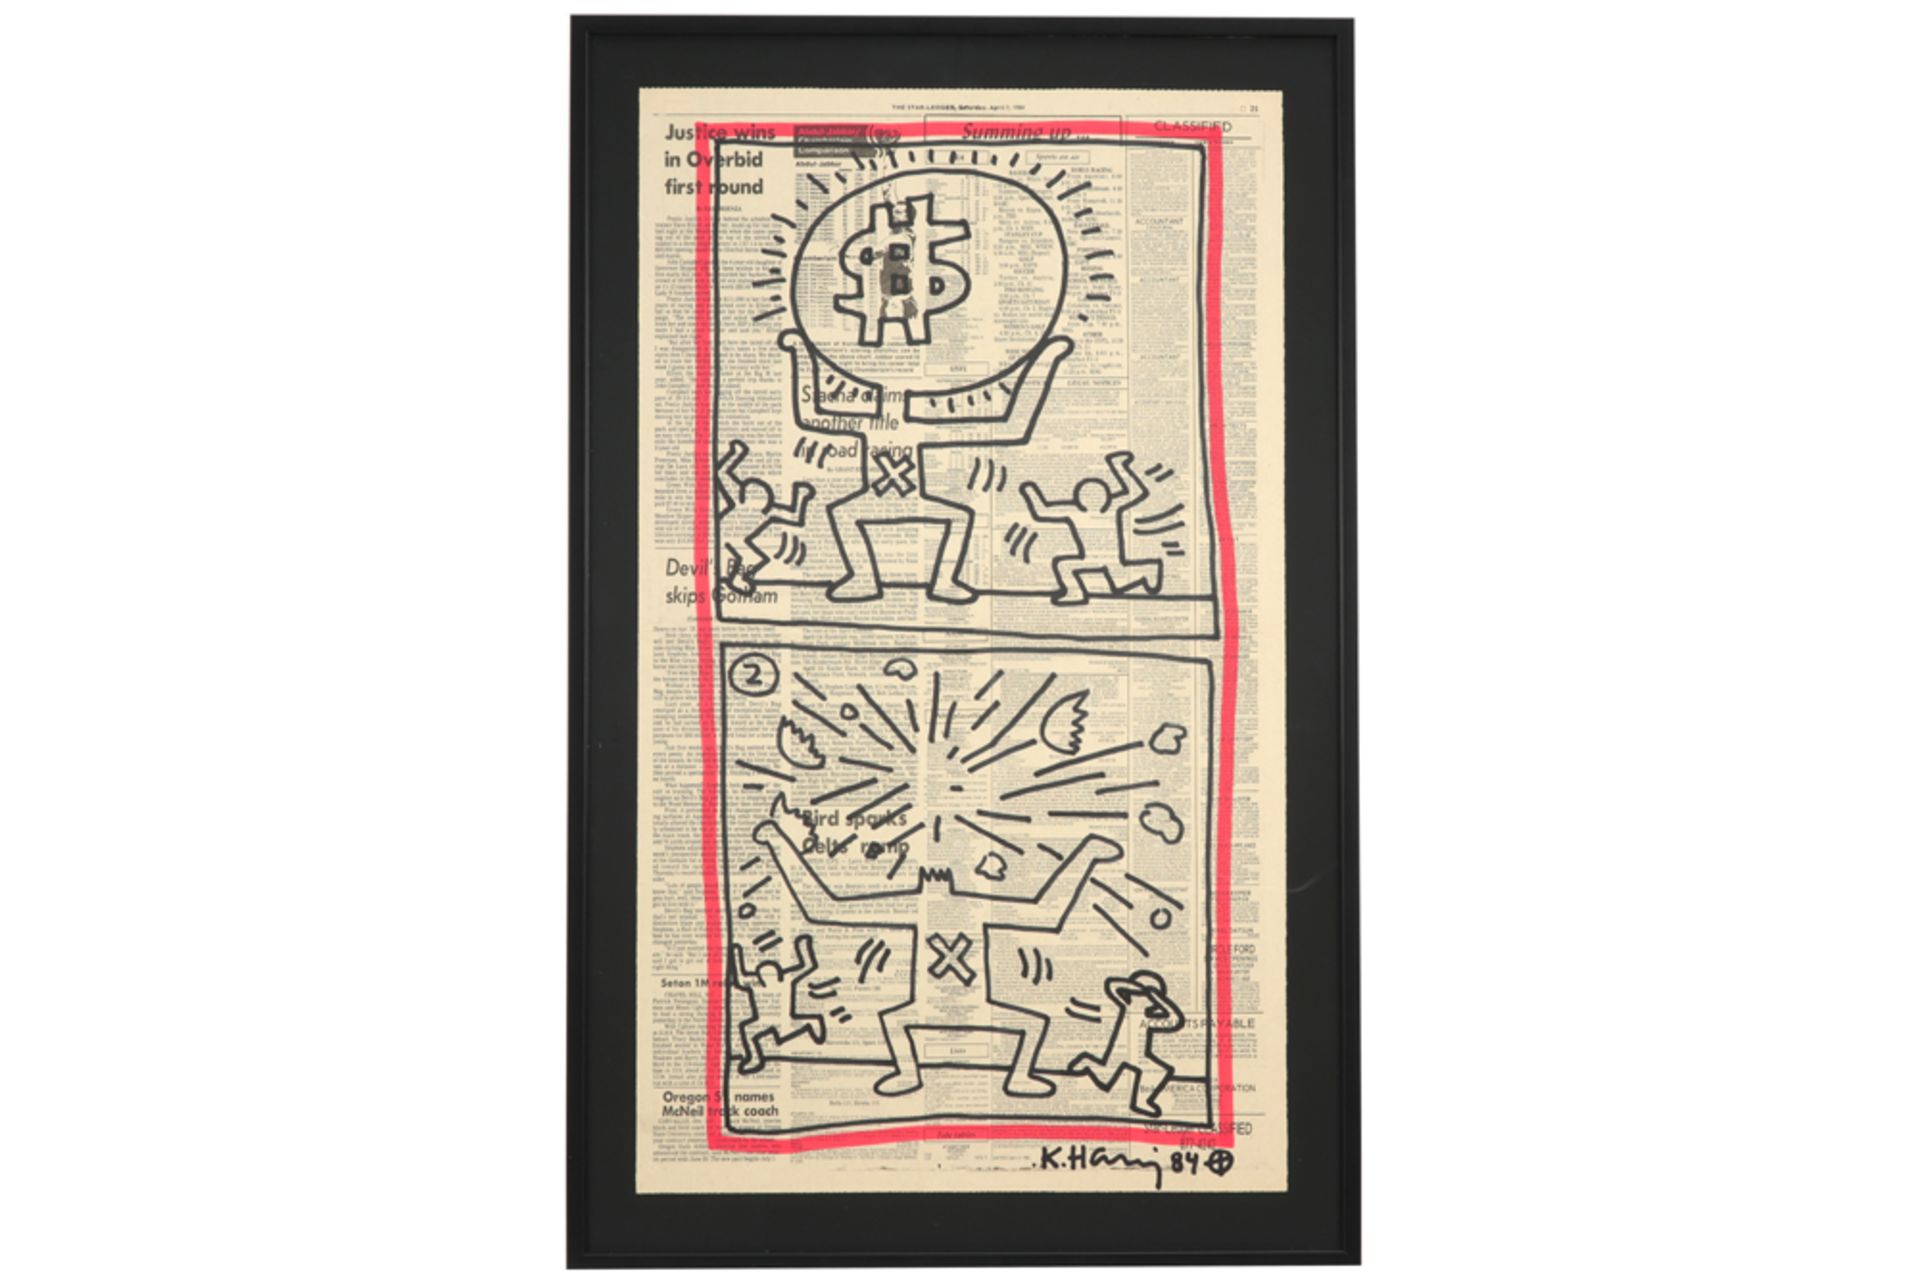 large Keith Haring signed and (19)84 dated drawing on a page of "The Star Ledger" from New Jersey dd - Image 3 of 3